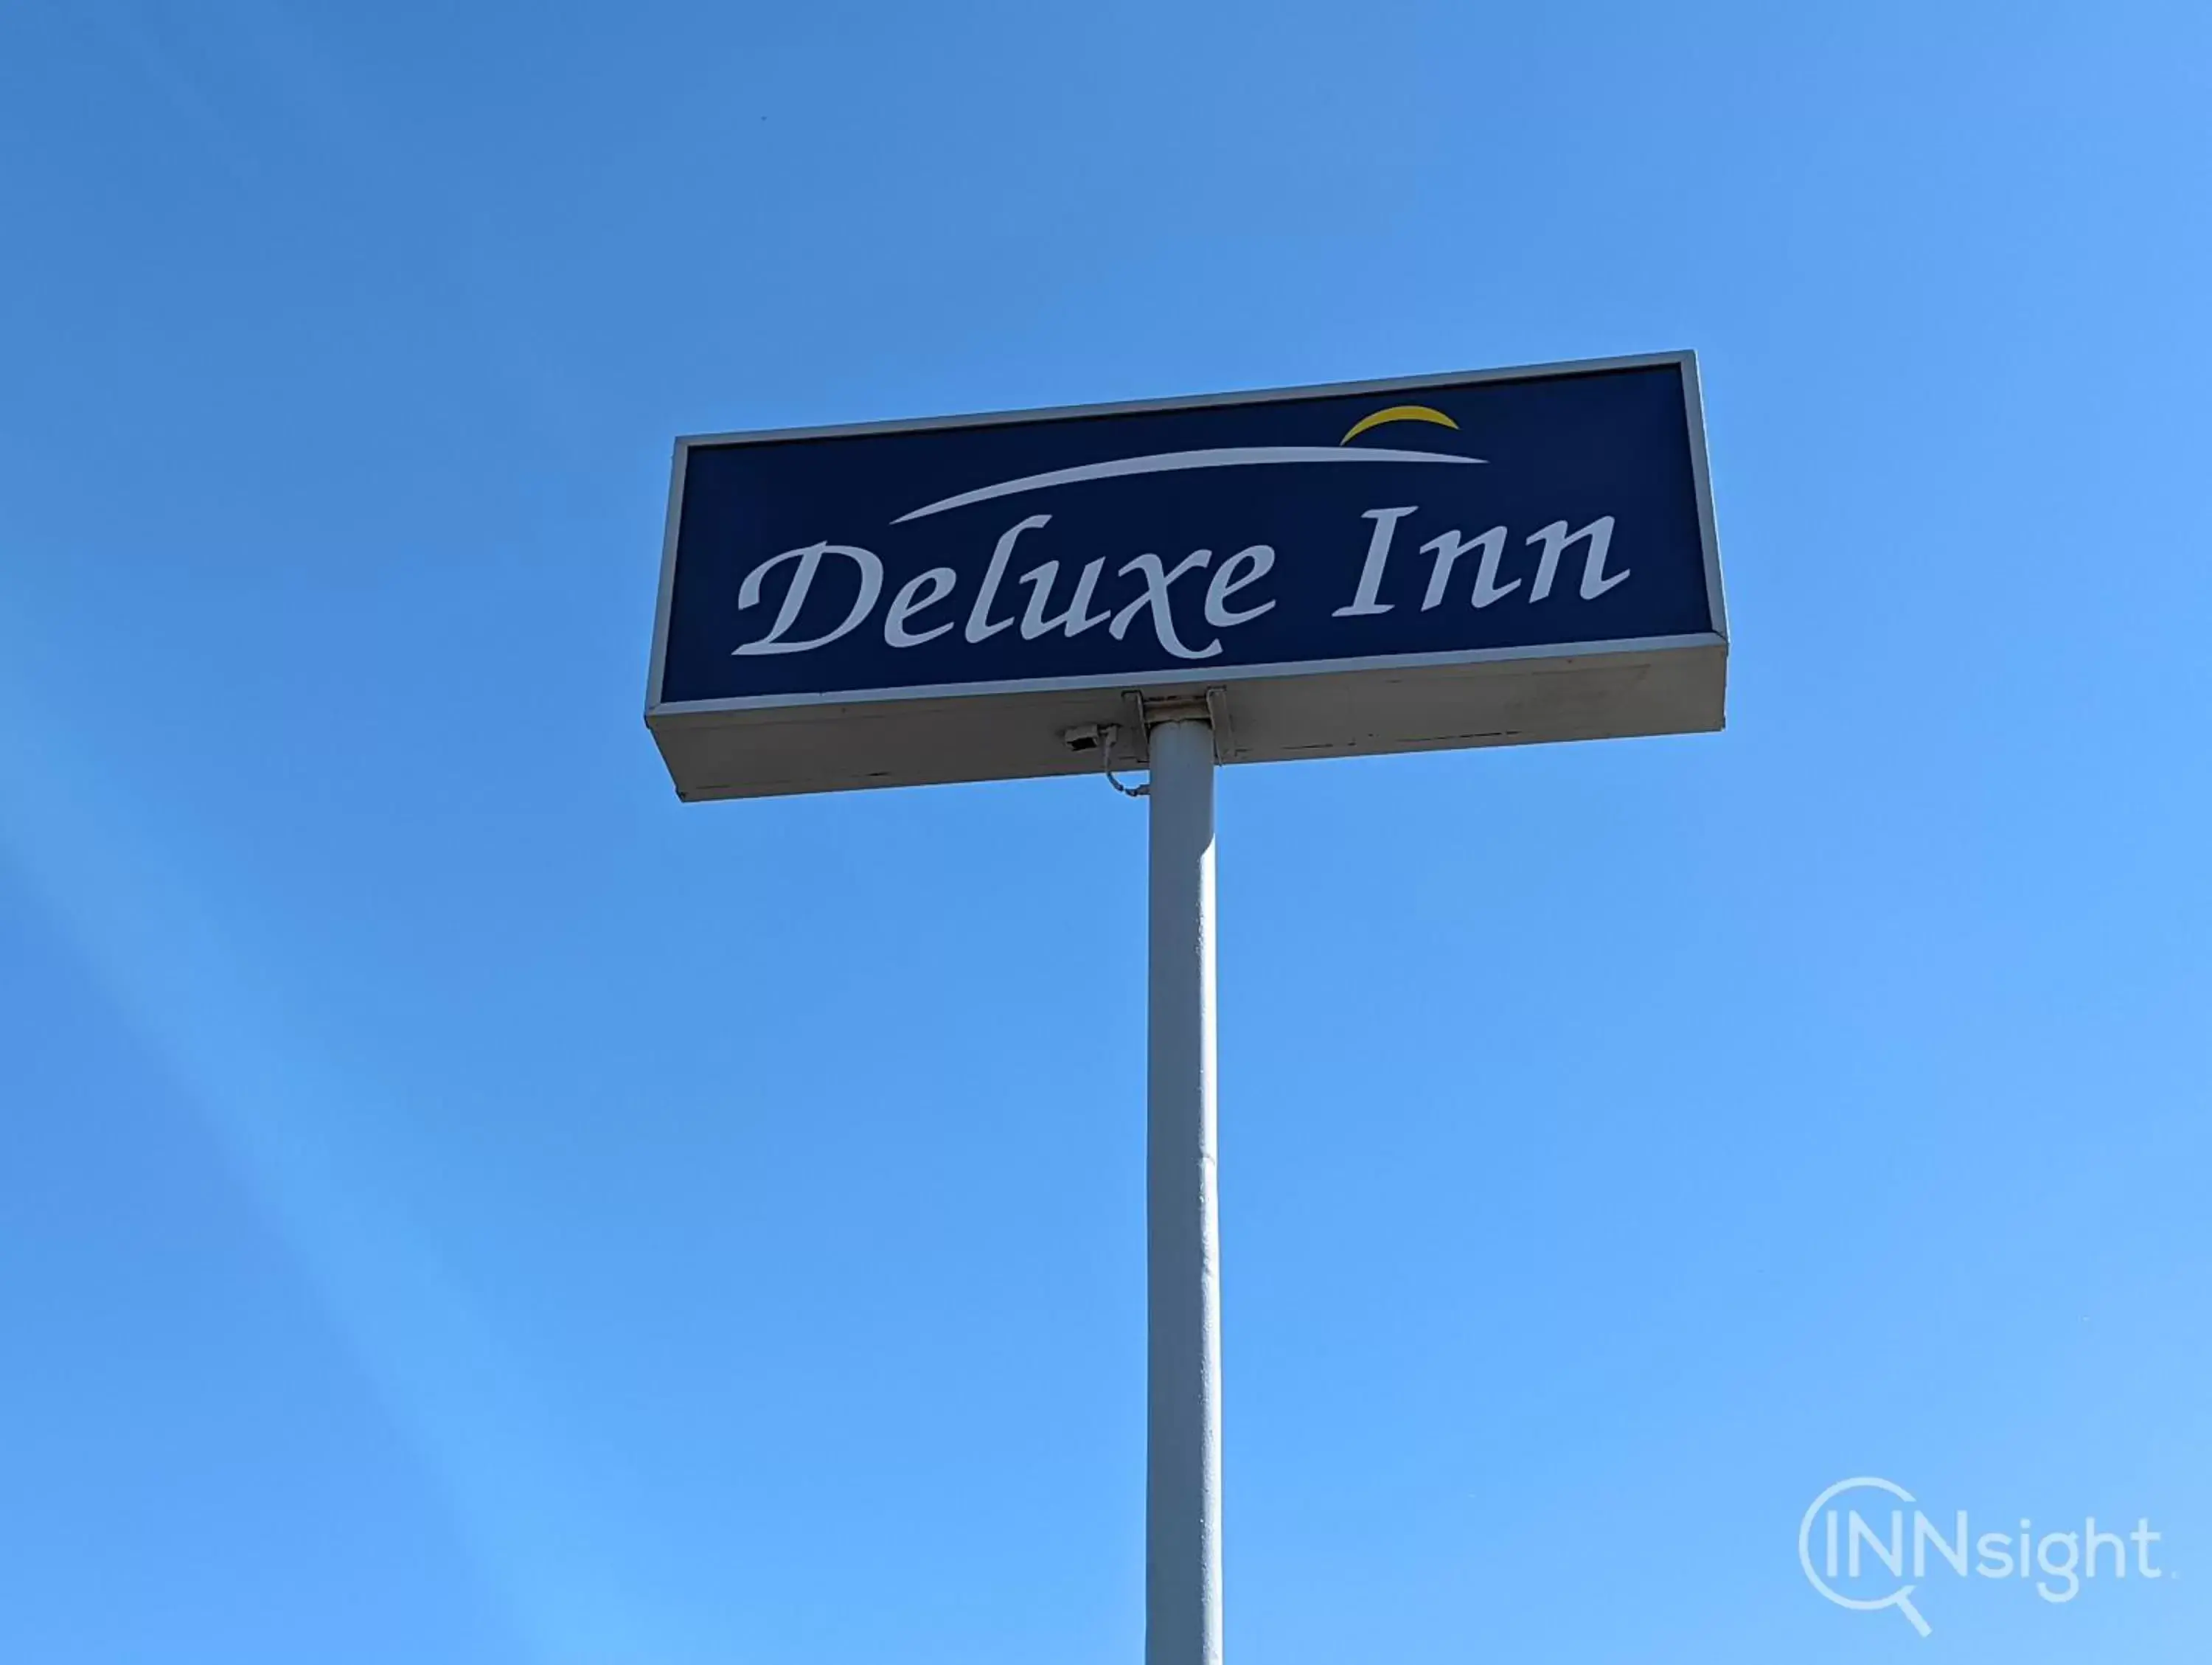 Property logo or sign in Deluxe Inn